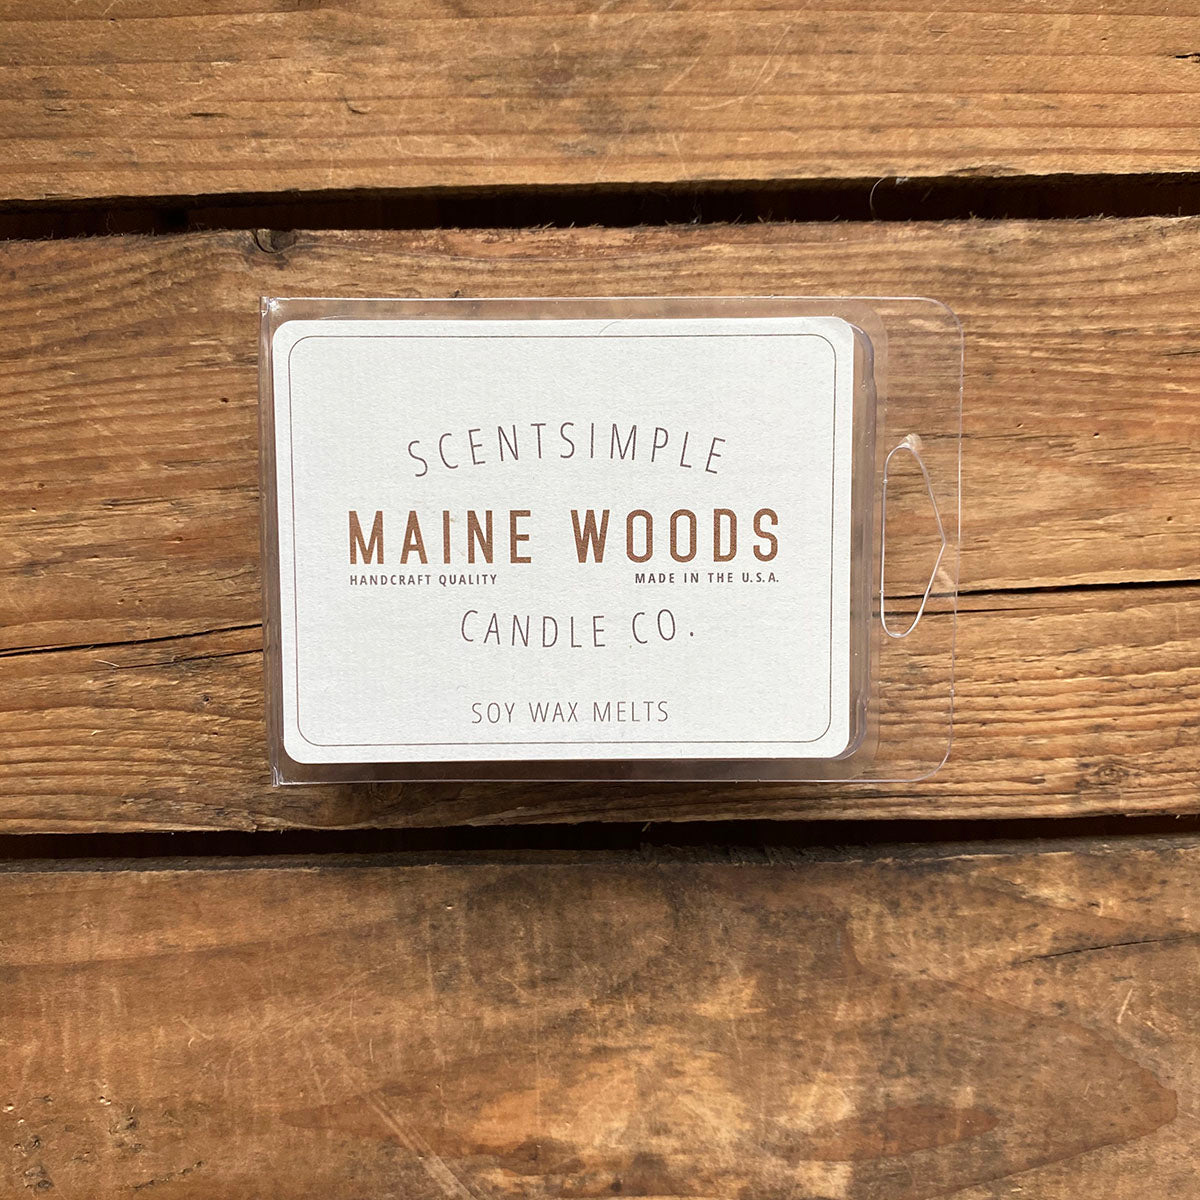 Maine Woods Scented Soy Wax Melts